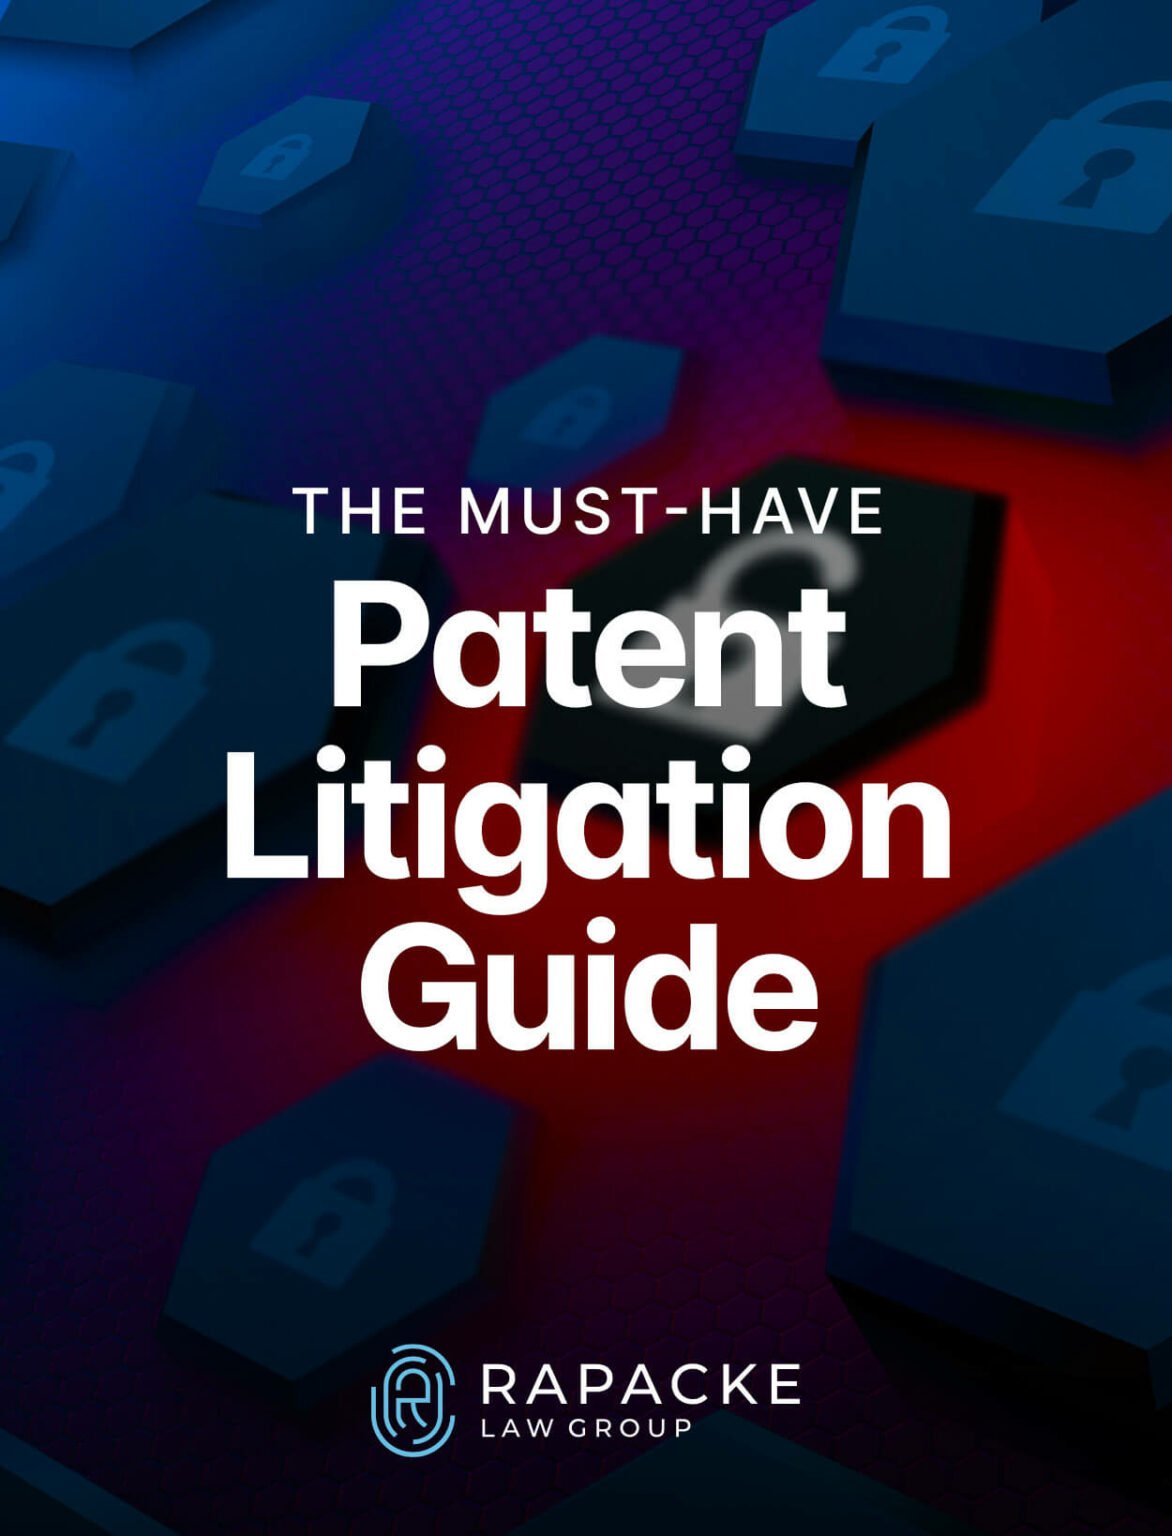 The Must-Have Patent Litigation Guide